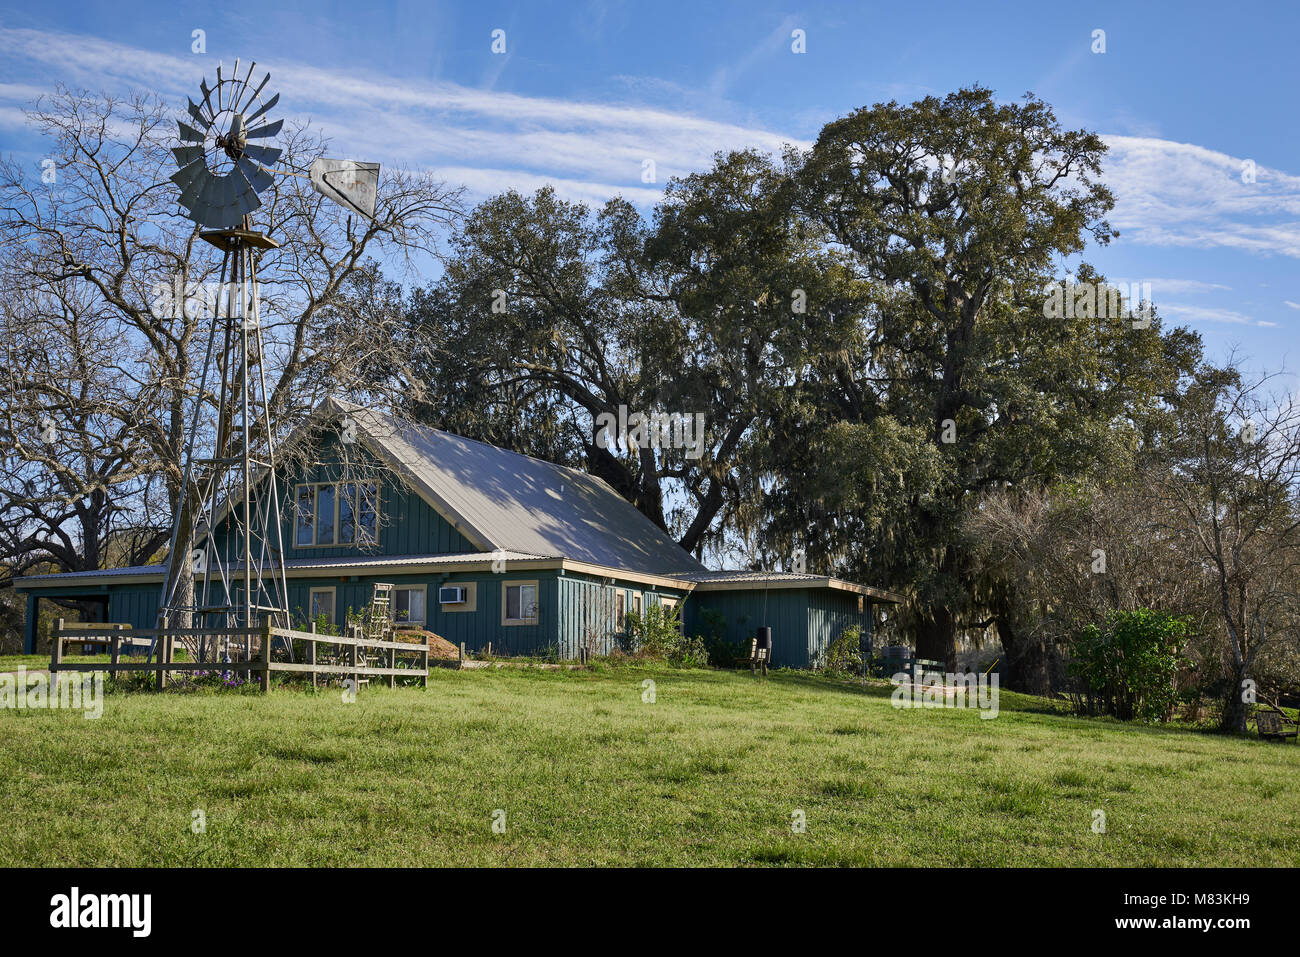 A small American steading with its associated Aermotor water pumping Windmill in Brazos Bend State Park, Texas. Stock Photo